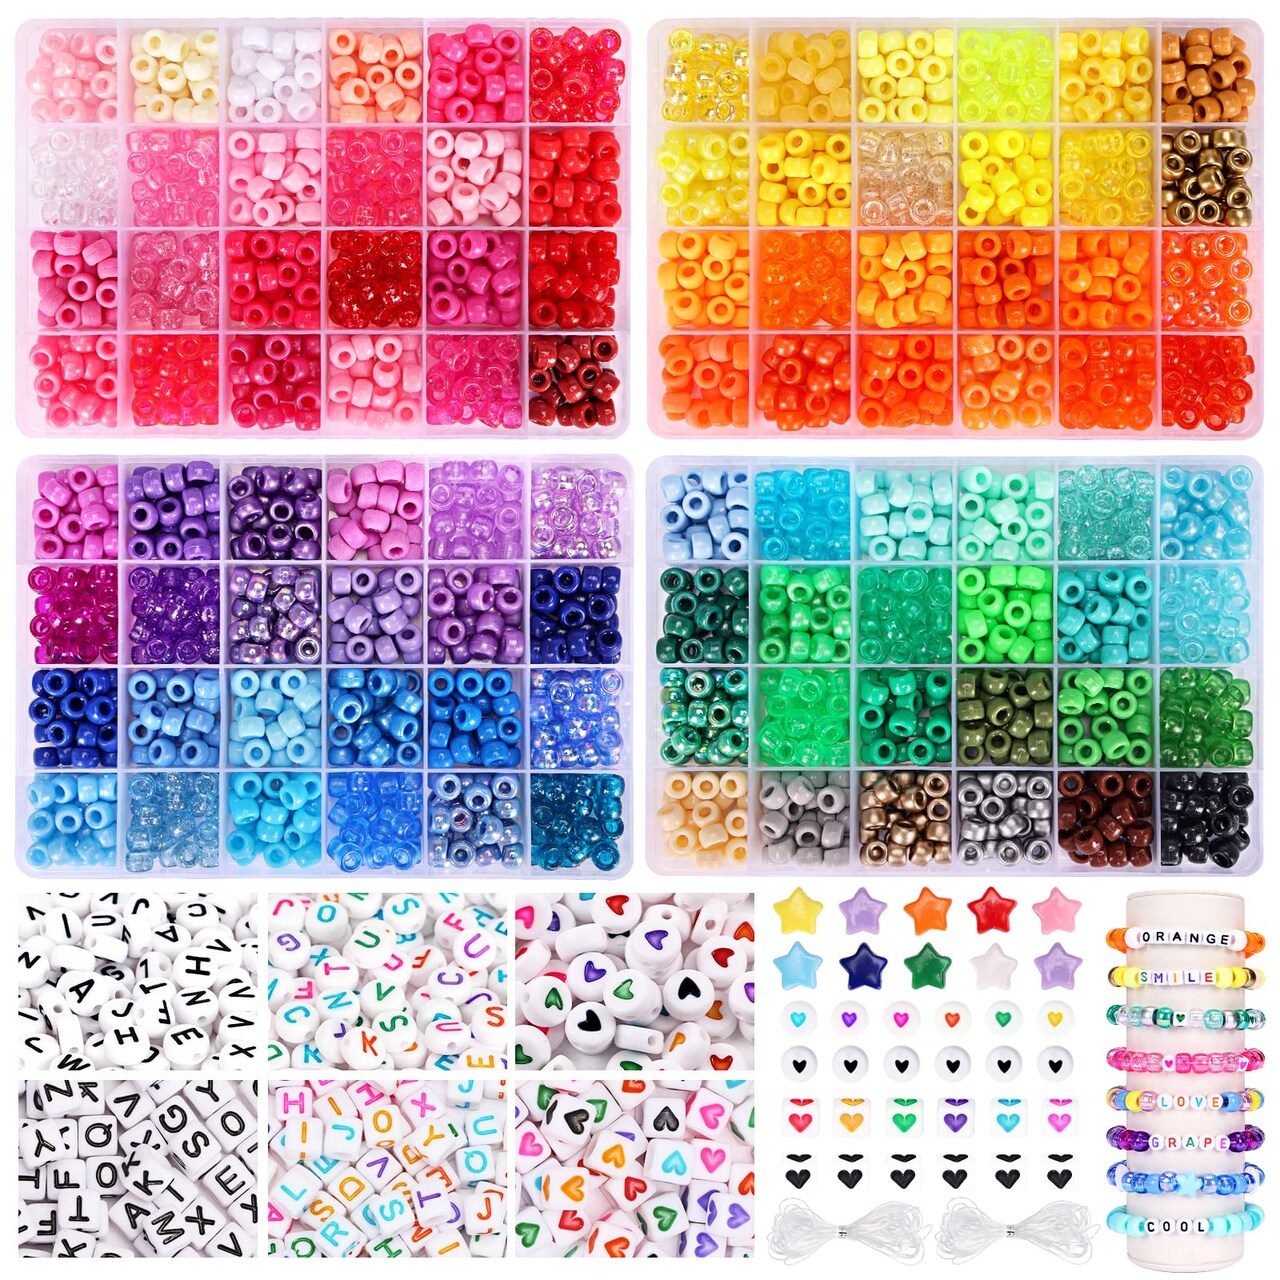 QUEFE 3250pcs Pony Beads Set, Kandi Beads 2400pcs Rainbow Beads in 96  Colors, 800pcs Letter Beads and Heart Beads with 20 Meter Elastic Threads  for Bracelet Jewelry Necklace Making